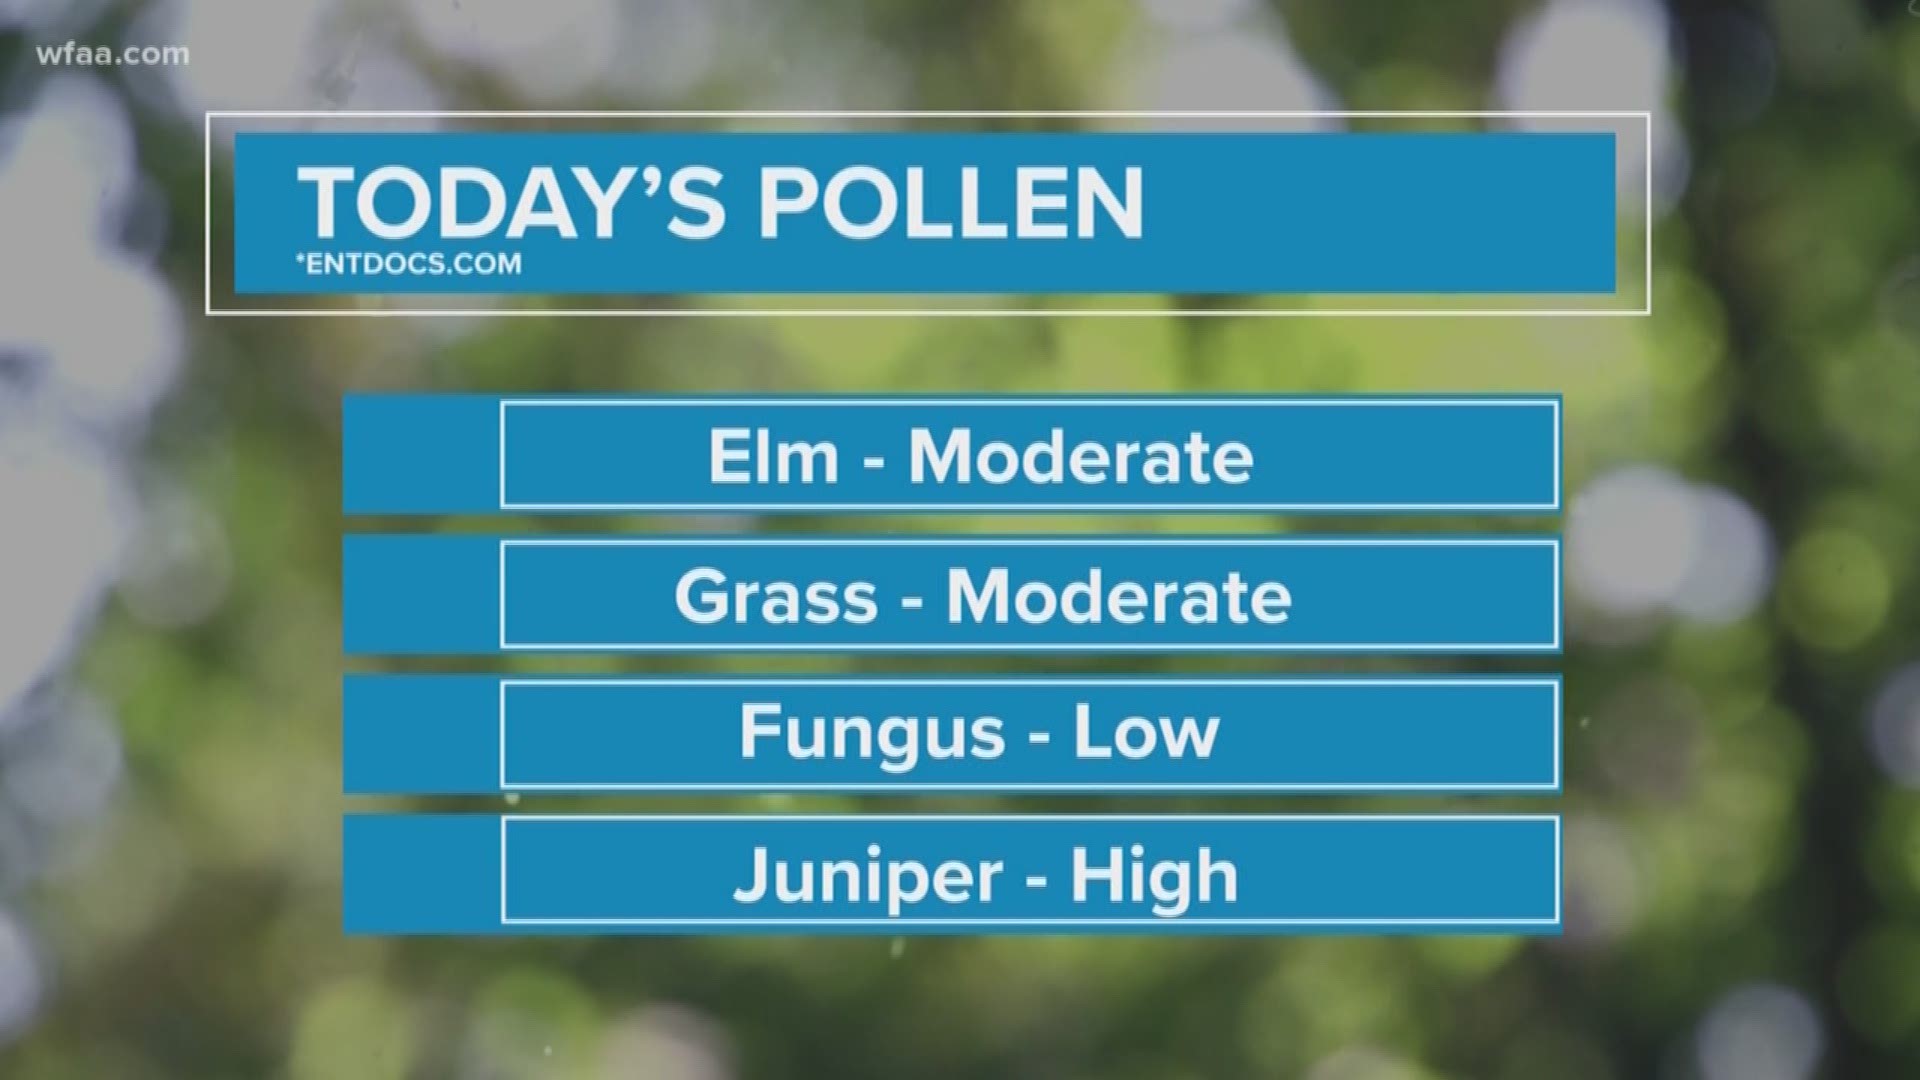 Winter, spring, summer, fall. Allergies can be bad all year in North Texas. Juniper is what many are feeling right now.